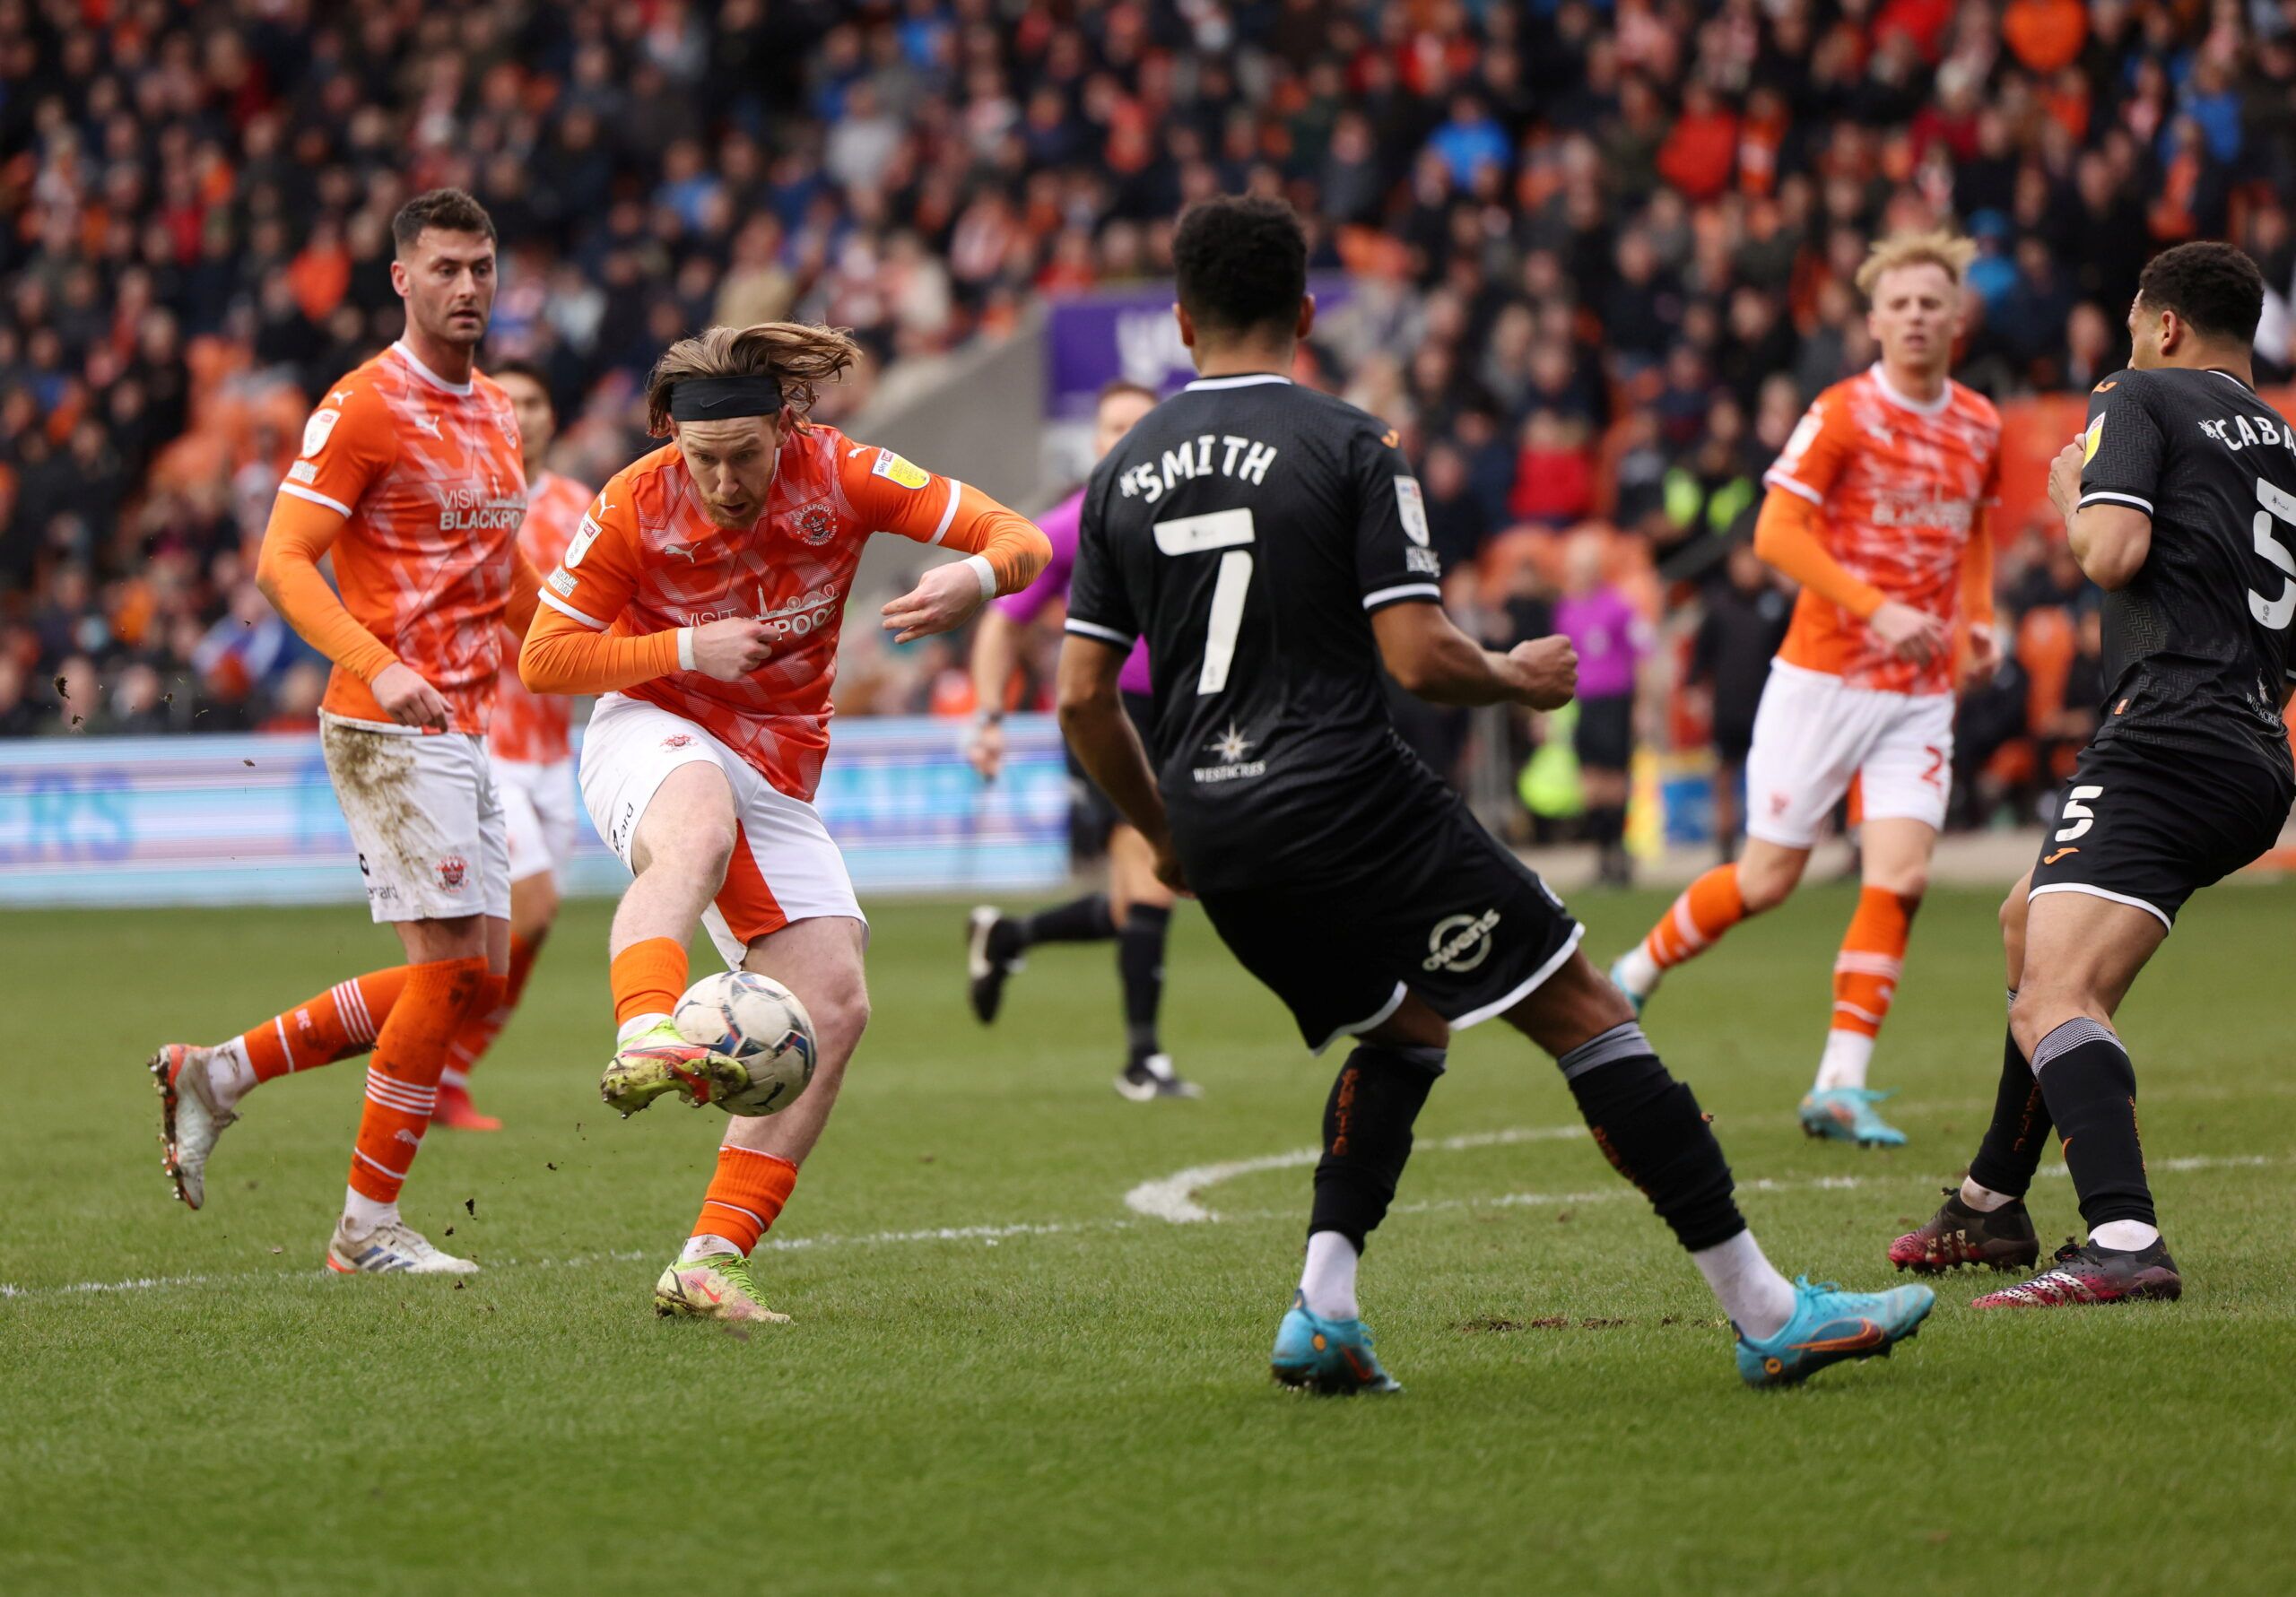 Soccer Football - Championship - Blackpool v Swansea City - Bloomfield Road, Blackpool , Britain - March 12, 2022  Blackpool's Josh Bowler shoots at goal  Action Images/John Clifton  EDITORIAL USE ONLY. No use with unauthorized audio, video, data, fixture lists, club/league logos or 